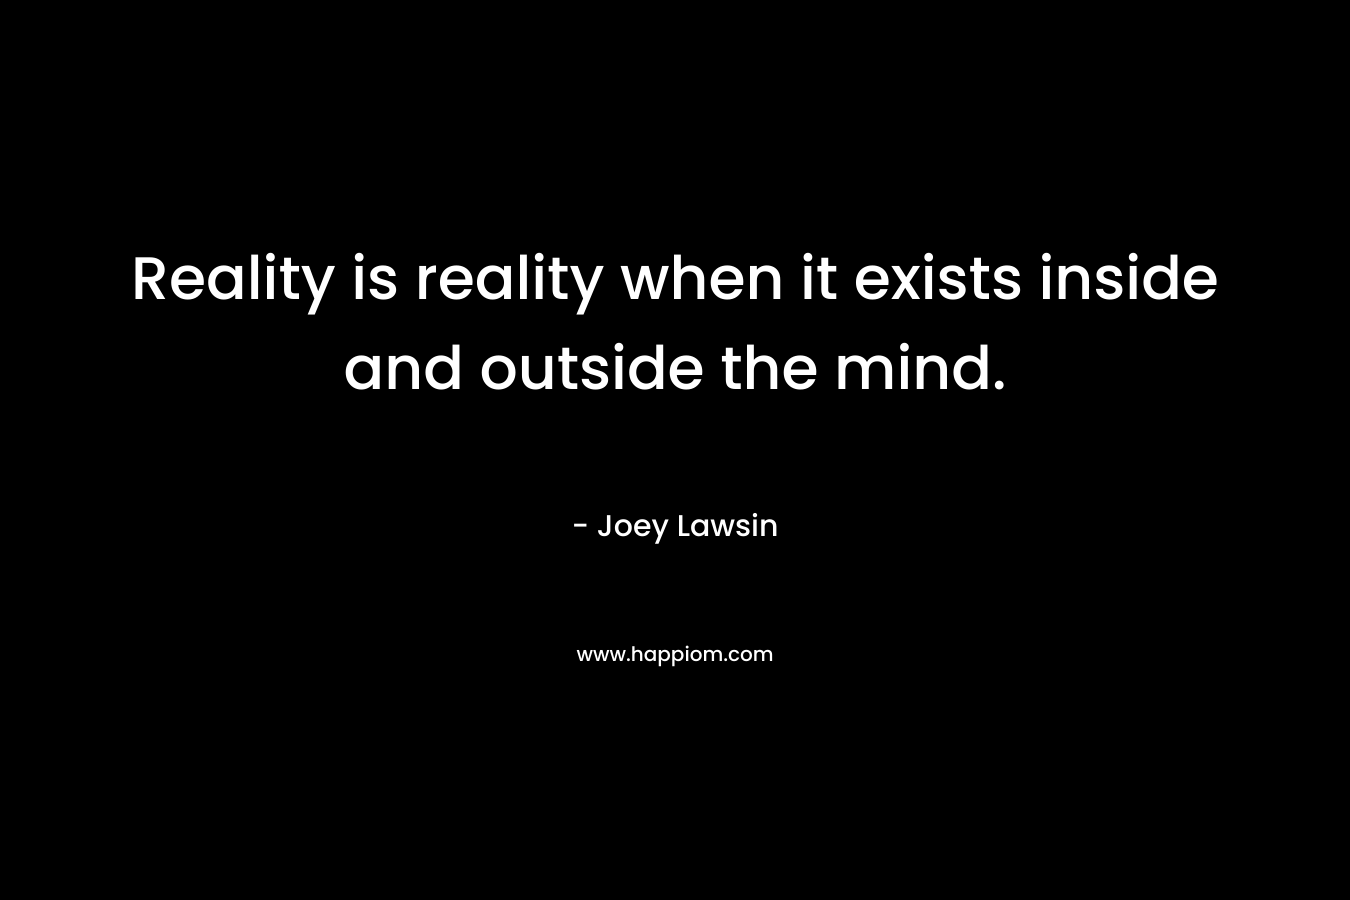 Reality is reality when it exists inside and outside the mind. – Joey Lawsin